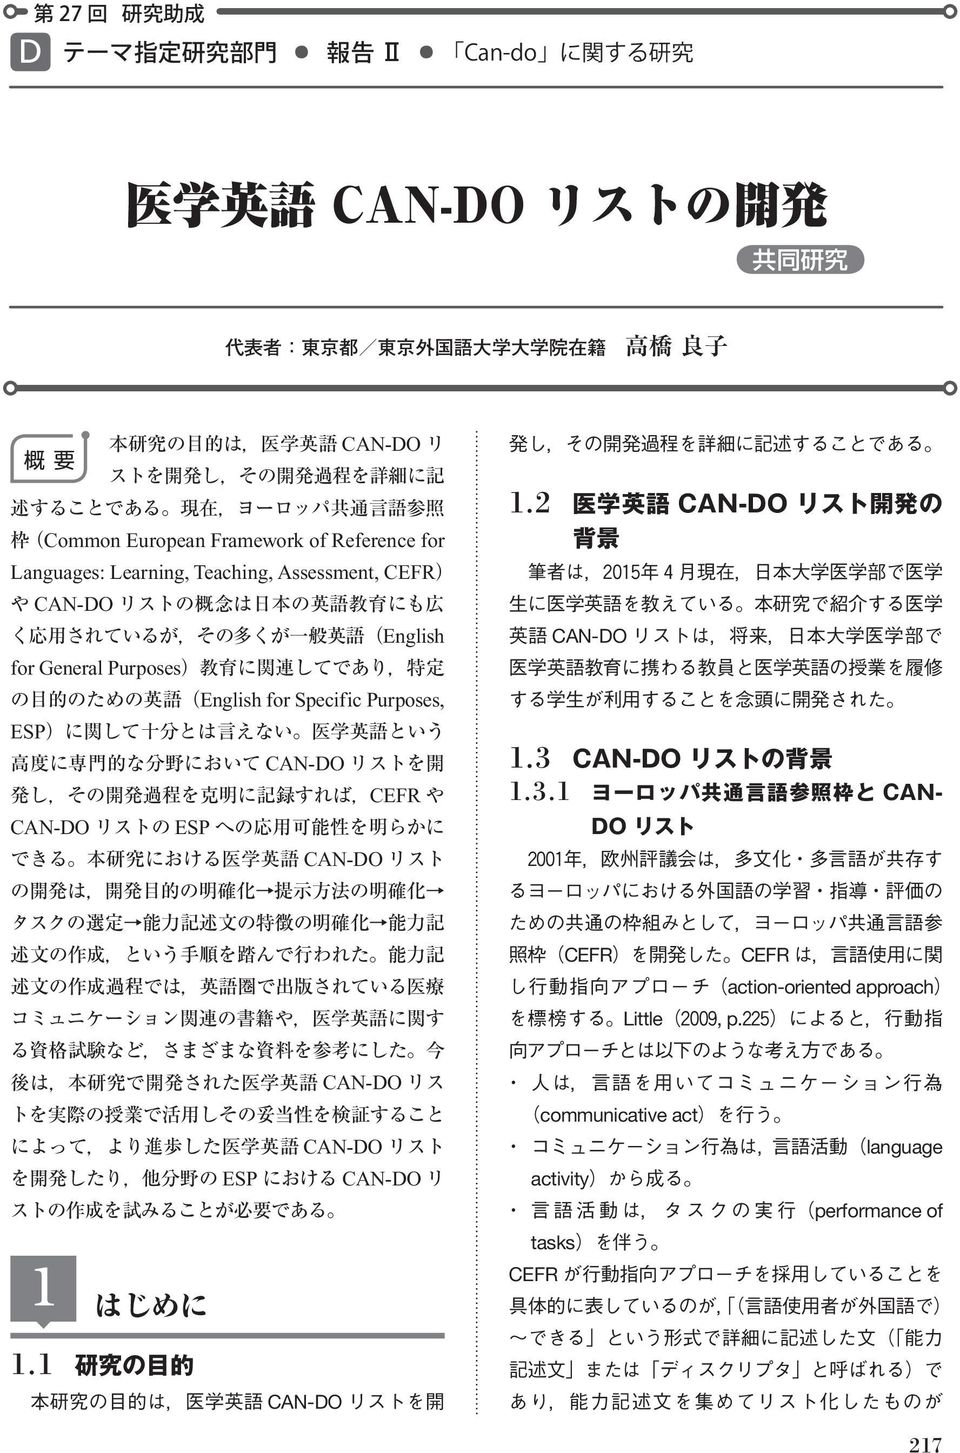 CAN-DO CEFR CAN-DO ESP CAN-DO CAN-DO CAN-DO ESP CAN-DO 1 はじめに 1.1 研 究 の 目 的 CAN-DO 1.2 医 学 英 語 CAN-DO リスト 開 発 の 背 景 2015 4 CAN-DO 1.3 